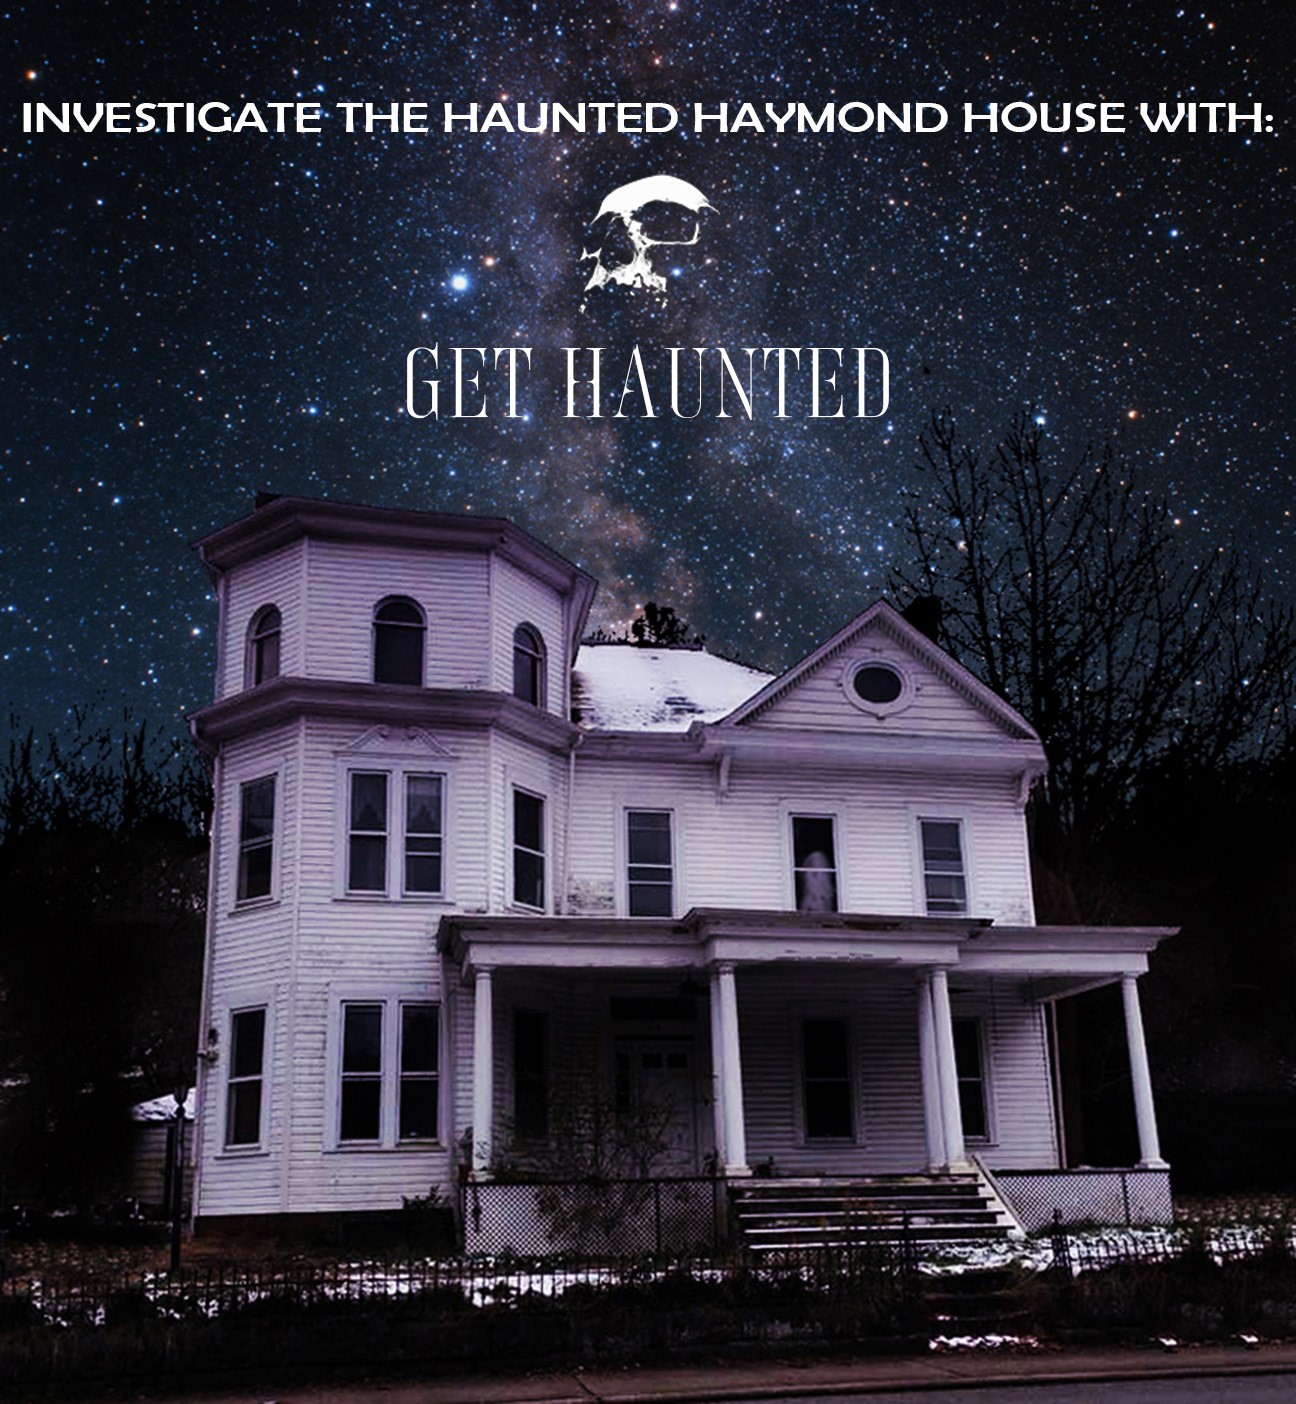 Investigate the Haunted Haymond House Sleepover Paranormal Investigation on jun. 11, 19:30@The Haymond House - Buy tickets and Get information on Thriller Events thriller.events